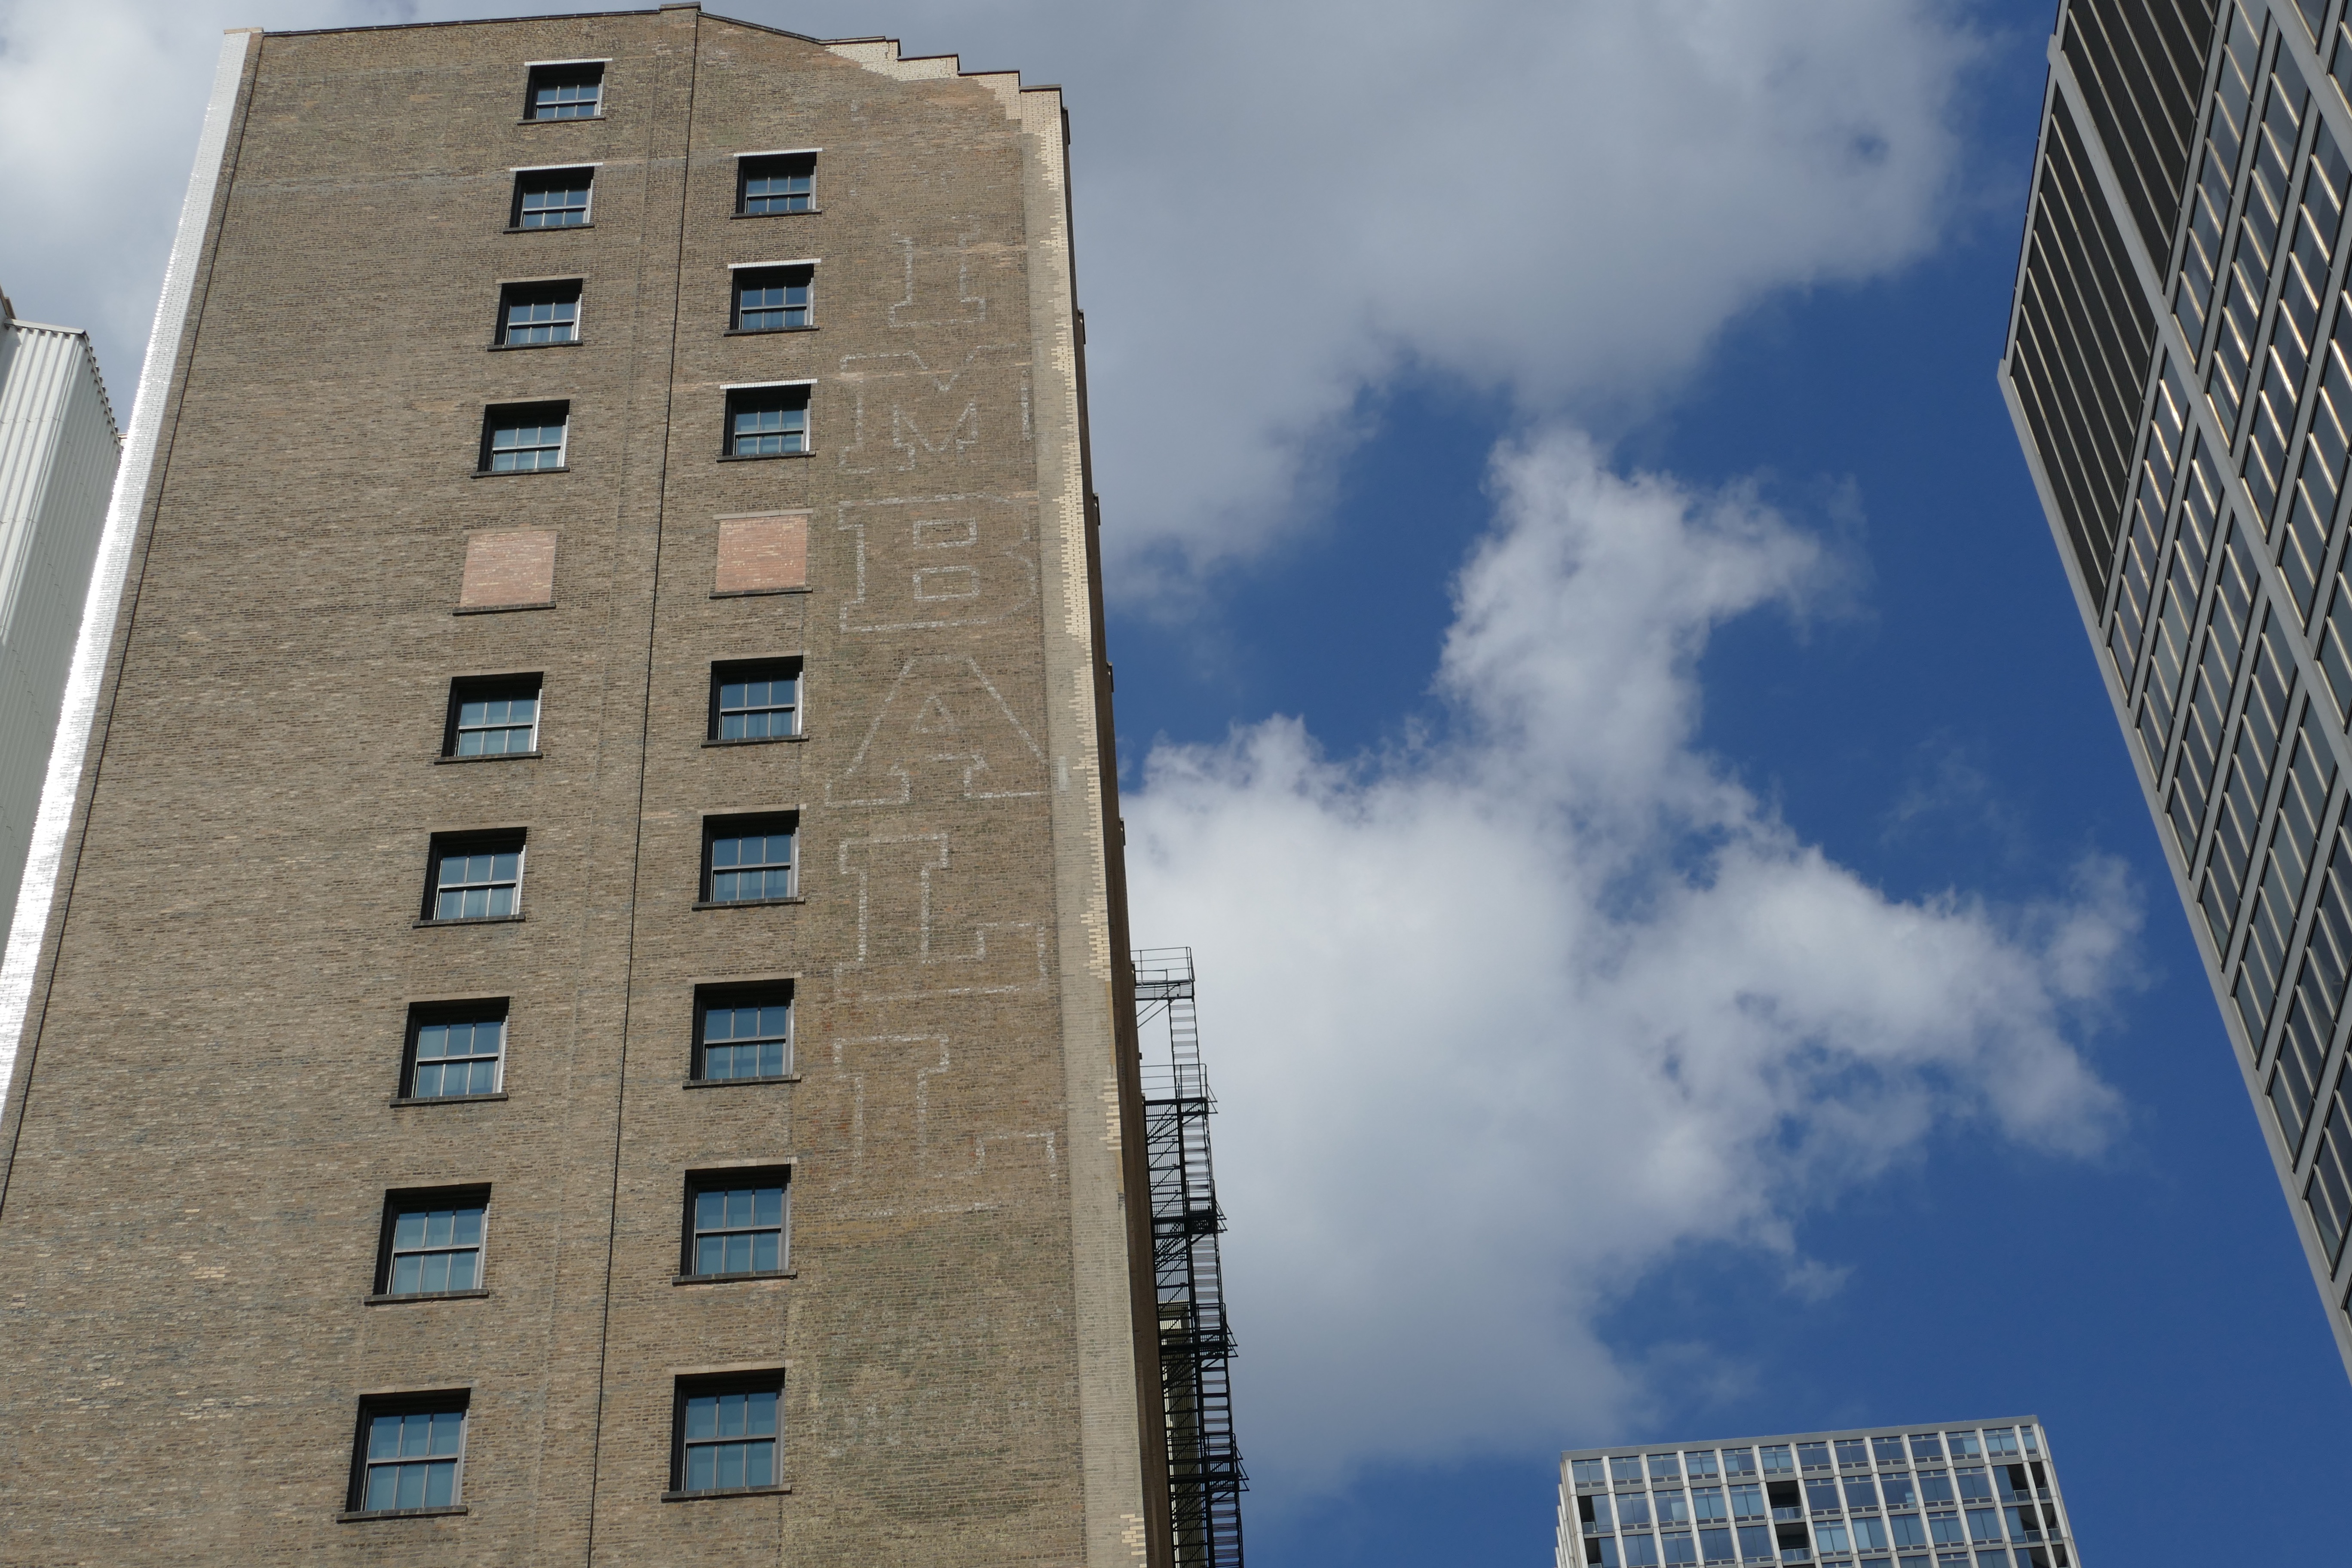 The faded W.W. Kimball advertisement on DePaul’s Lewis Center. (Photo courtesy of Marissa Nelson)